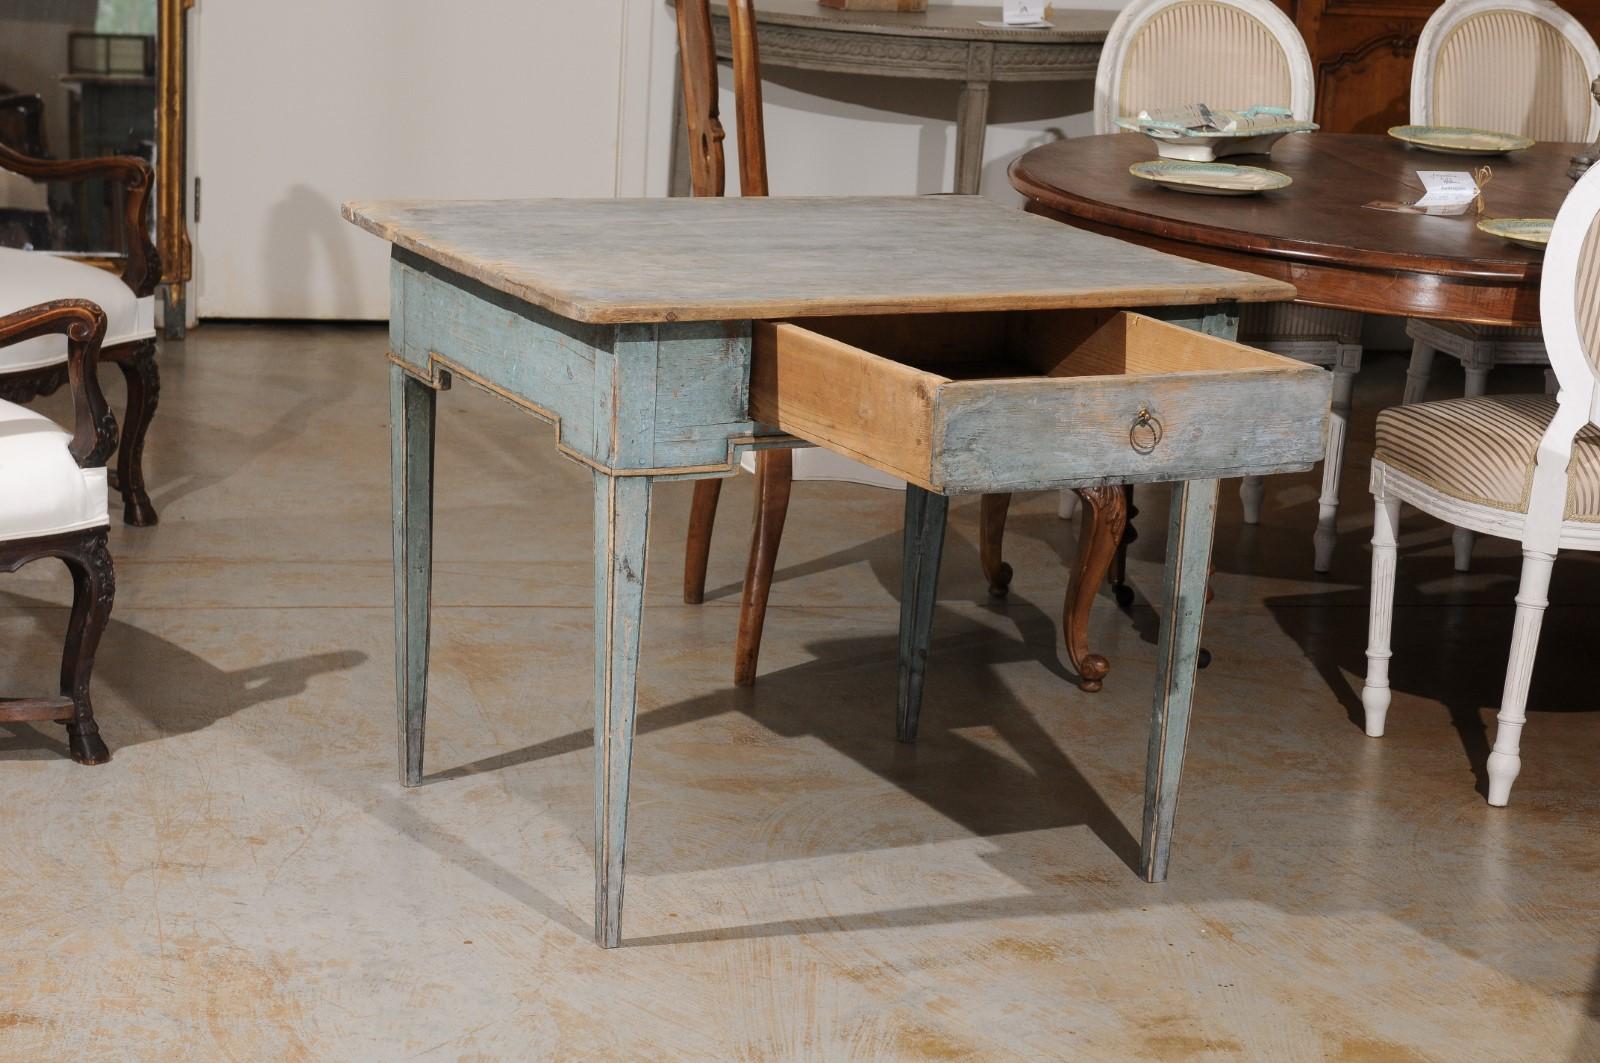 19th Century Swedish Provincial 1800s Painted Side Table with Single Drawer and Tapered Legs